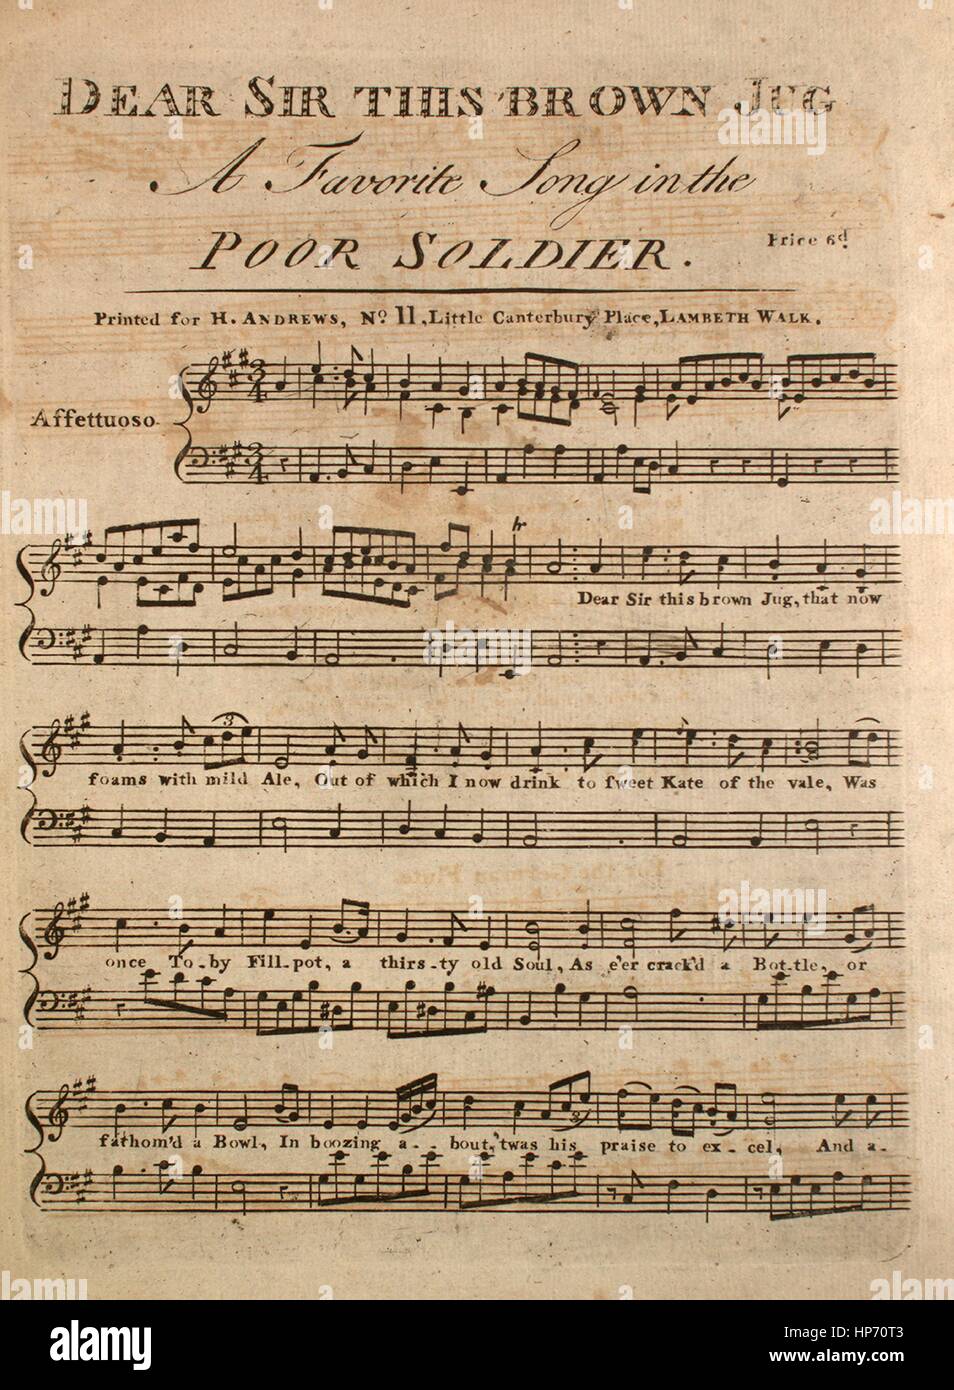 Sheet music cover image of the song 'Dear Sir This Brown Jug A Favorite Song in the Poor Soldier', with original authorship notes reading 'na', 1900. The publisher is listed as 'Printed for H. Andrews, No.11 Little Canterbury Place, Lambeth Walk', the form of composition is 'strophic', the instrumentation is 'piano and voice; German flute', the first line reads 'Dear Sir this brown Jug, that now foams with mild Ale', and the illustration artist is listed as 'None'. Stock Photo